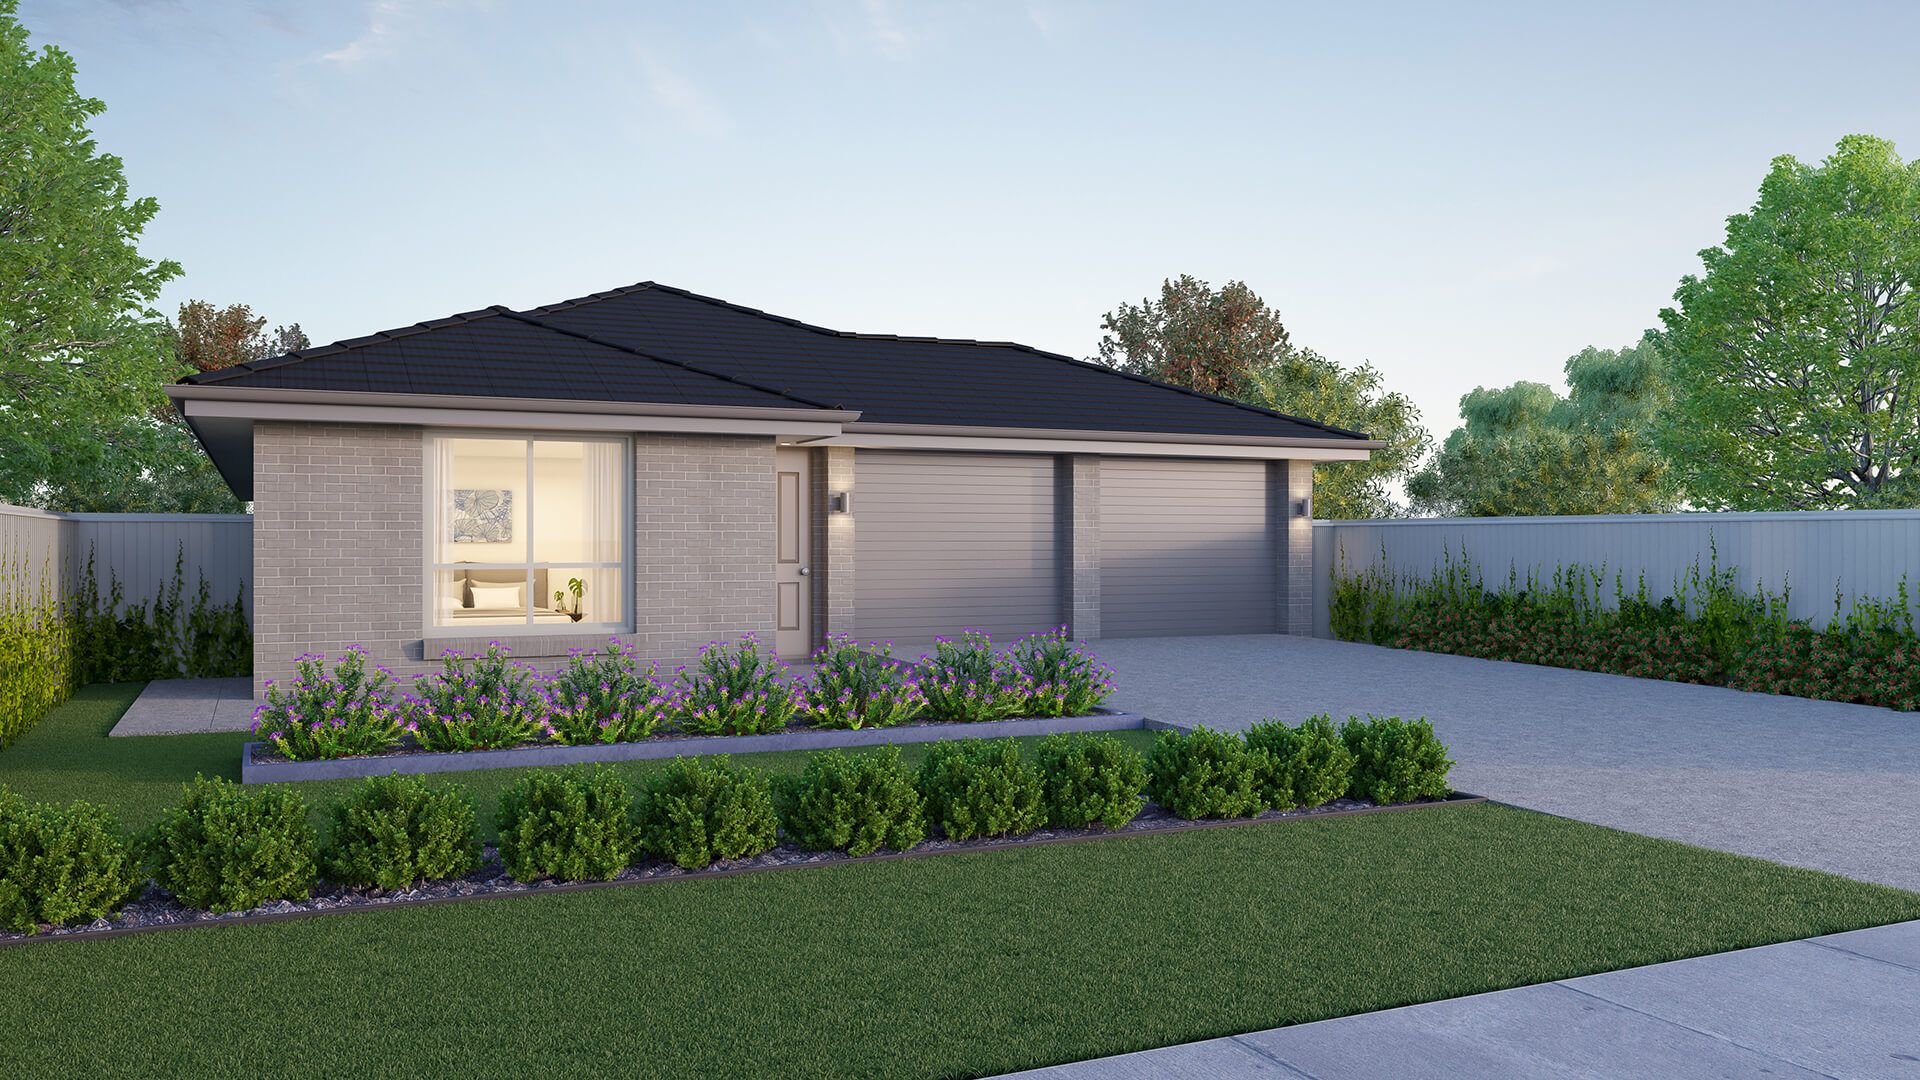 3 bedrooms New House & Land in Lot 21 Vino Street ANGLE VALE SA, 5117